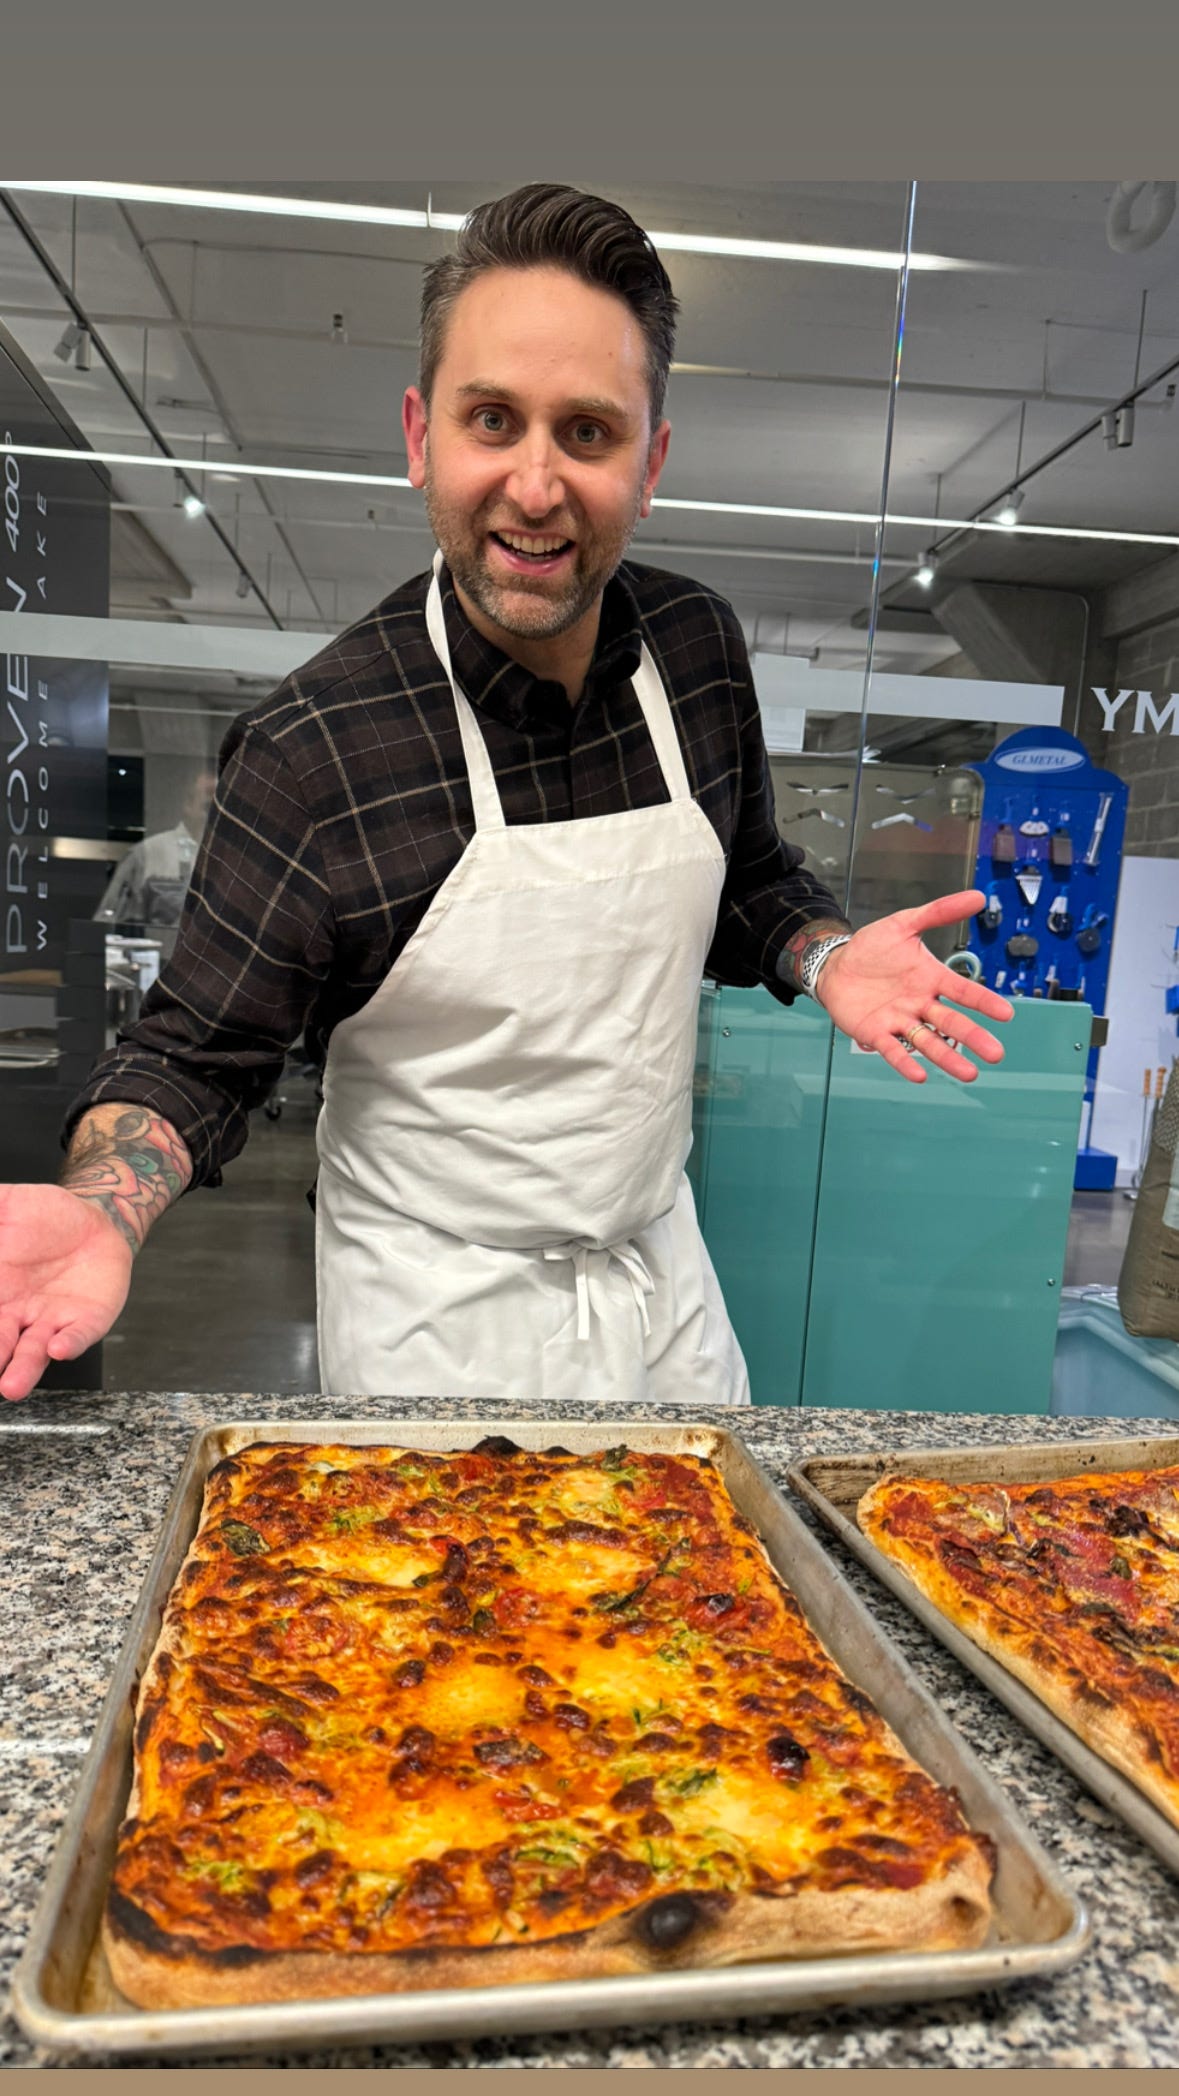 My friend Matt at pizza class. He's wearing and apron and posing proudly with his freshly-baked Pizza Romana, which is on a sheet pan on the counter in front of him.